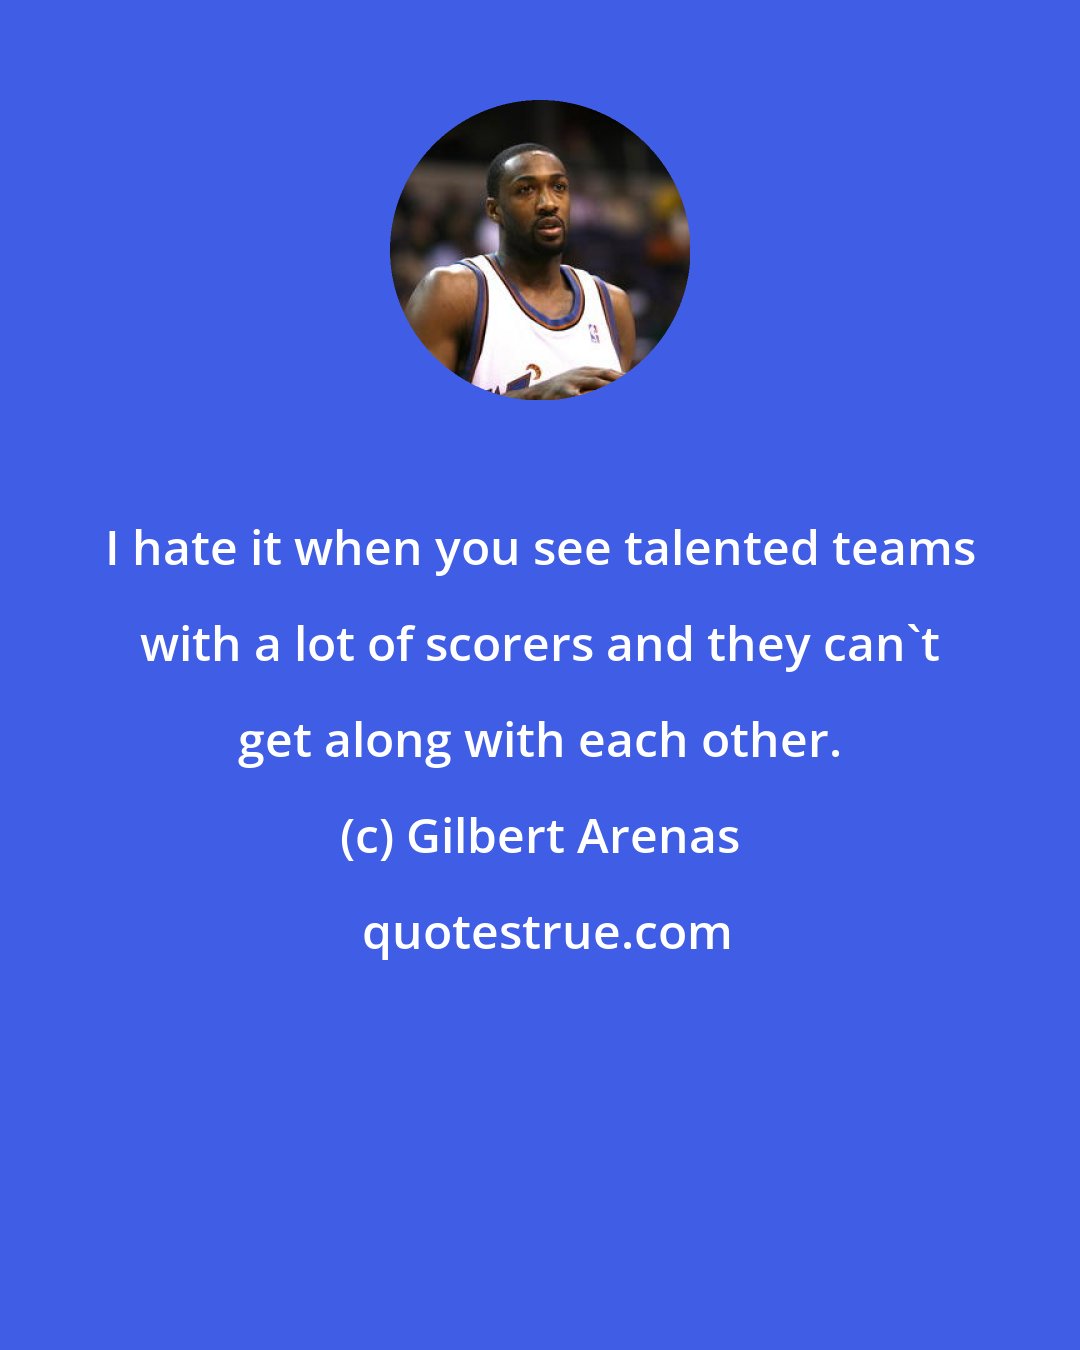 Gilbert Arenas: I hate it when you see talented teams with a lot of scorers and they can't get along with each other.